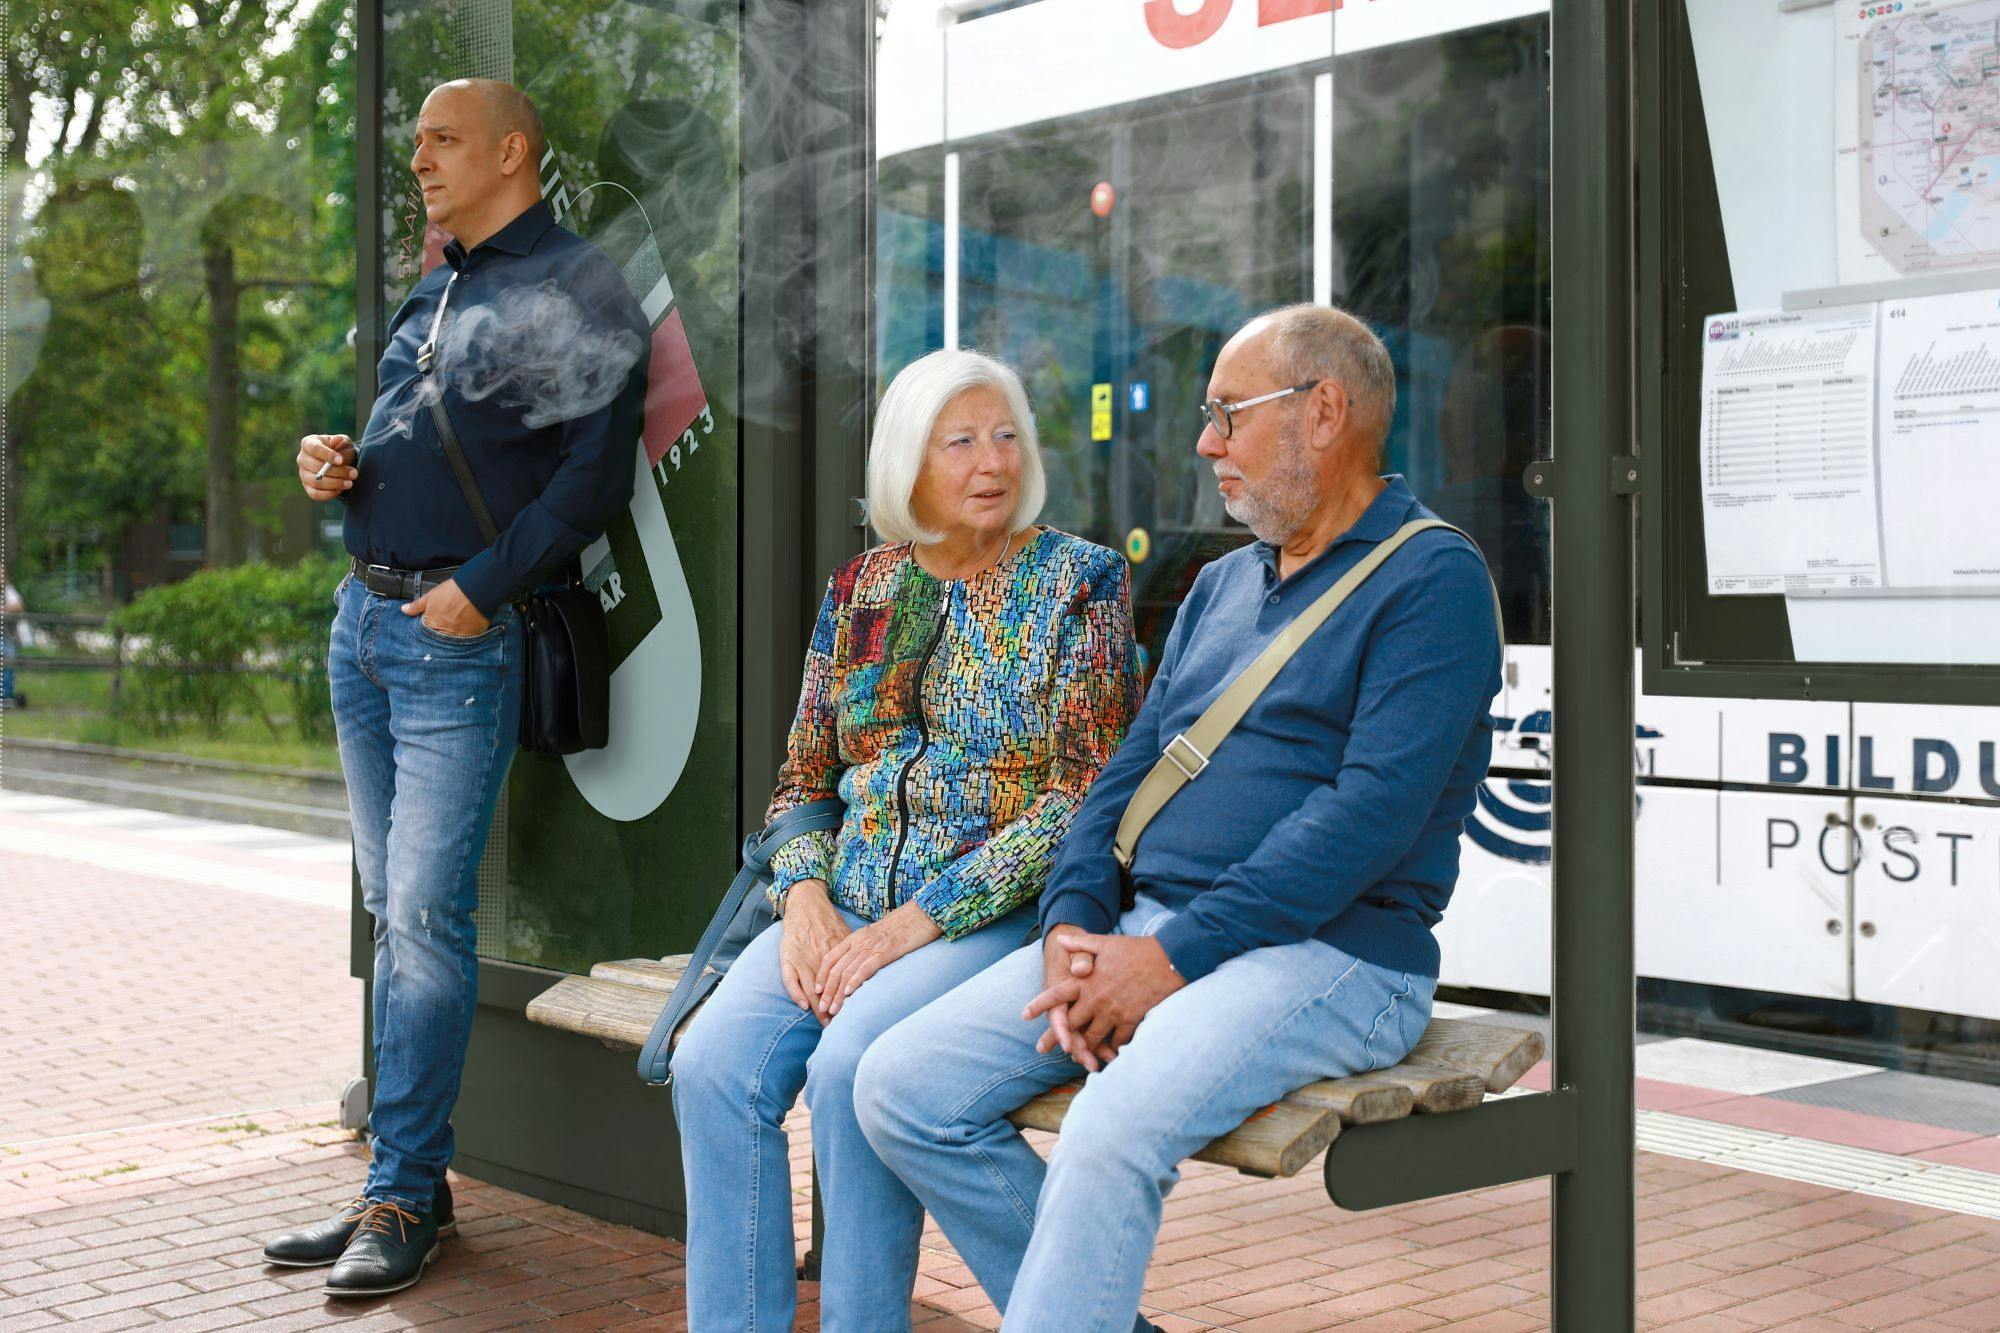 Stock image of people waiting at a bus stop